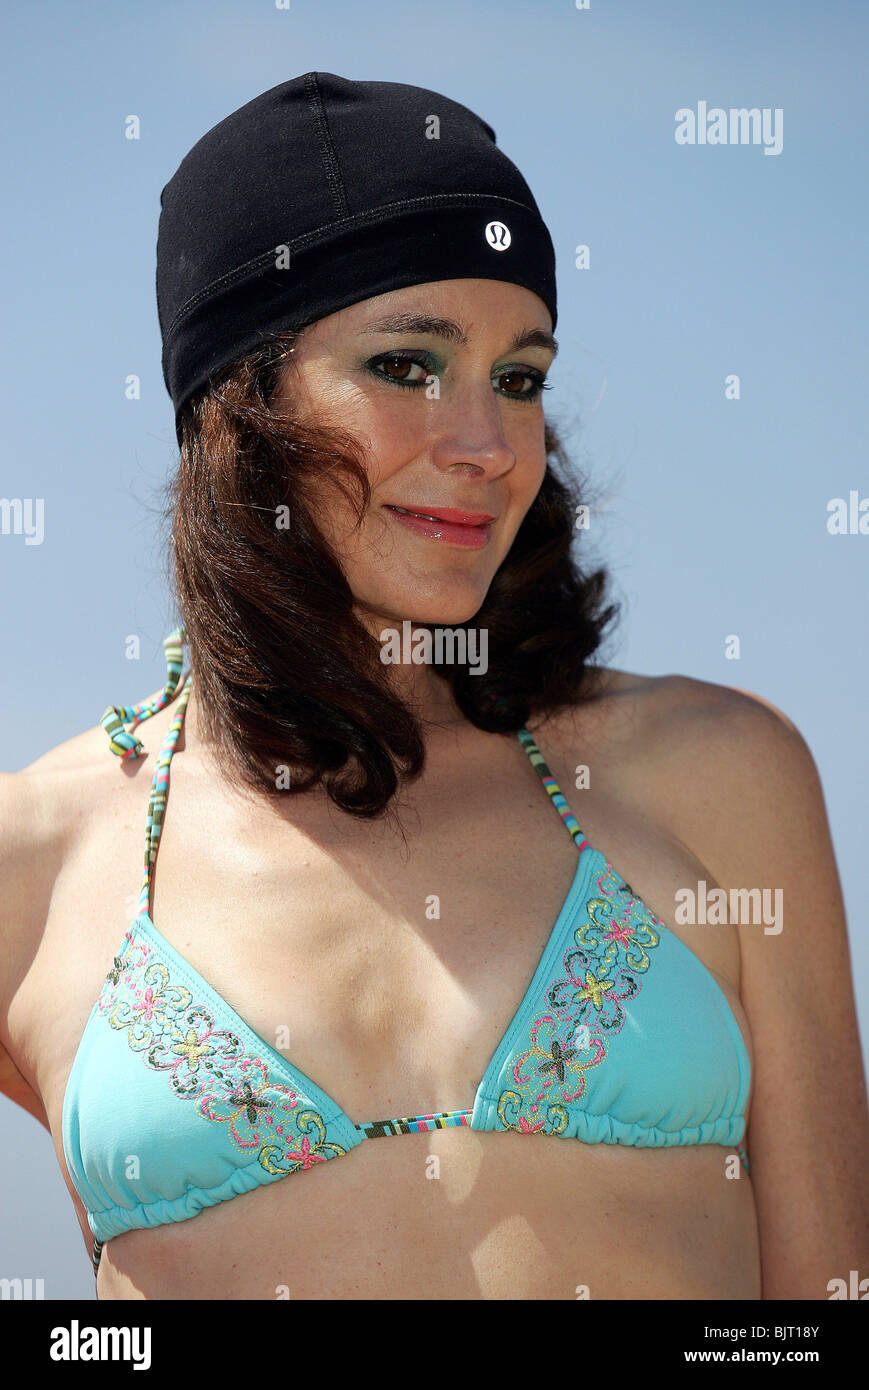 SEAN YOUNG CANNES FILM FESTIVAL 2004 CANNES FRANCE 13 May 2004 Stock Photo  - Alamy